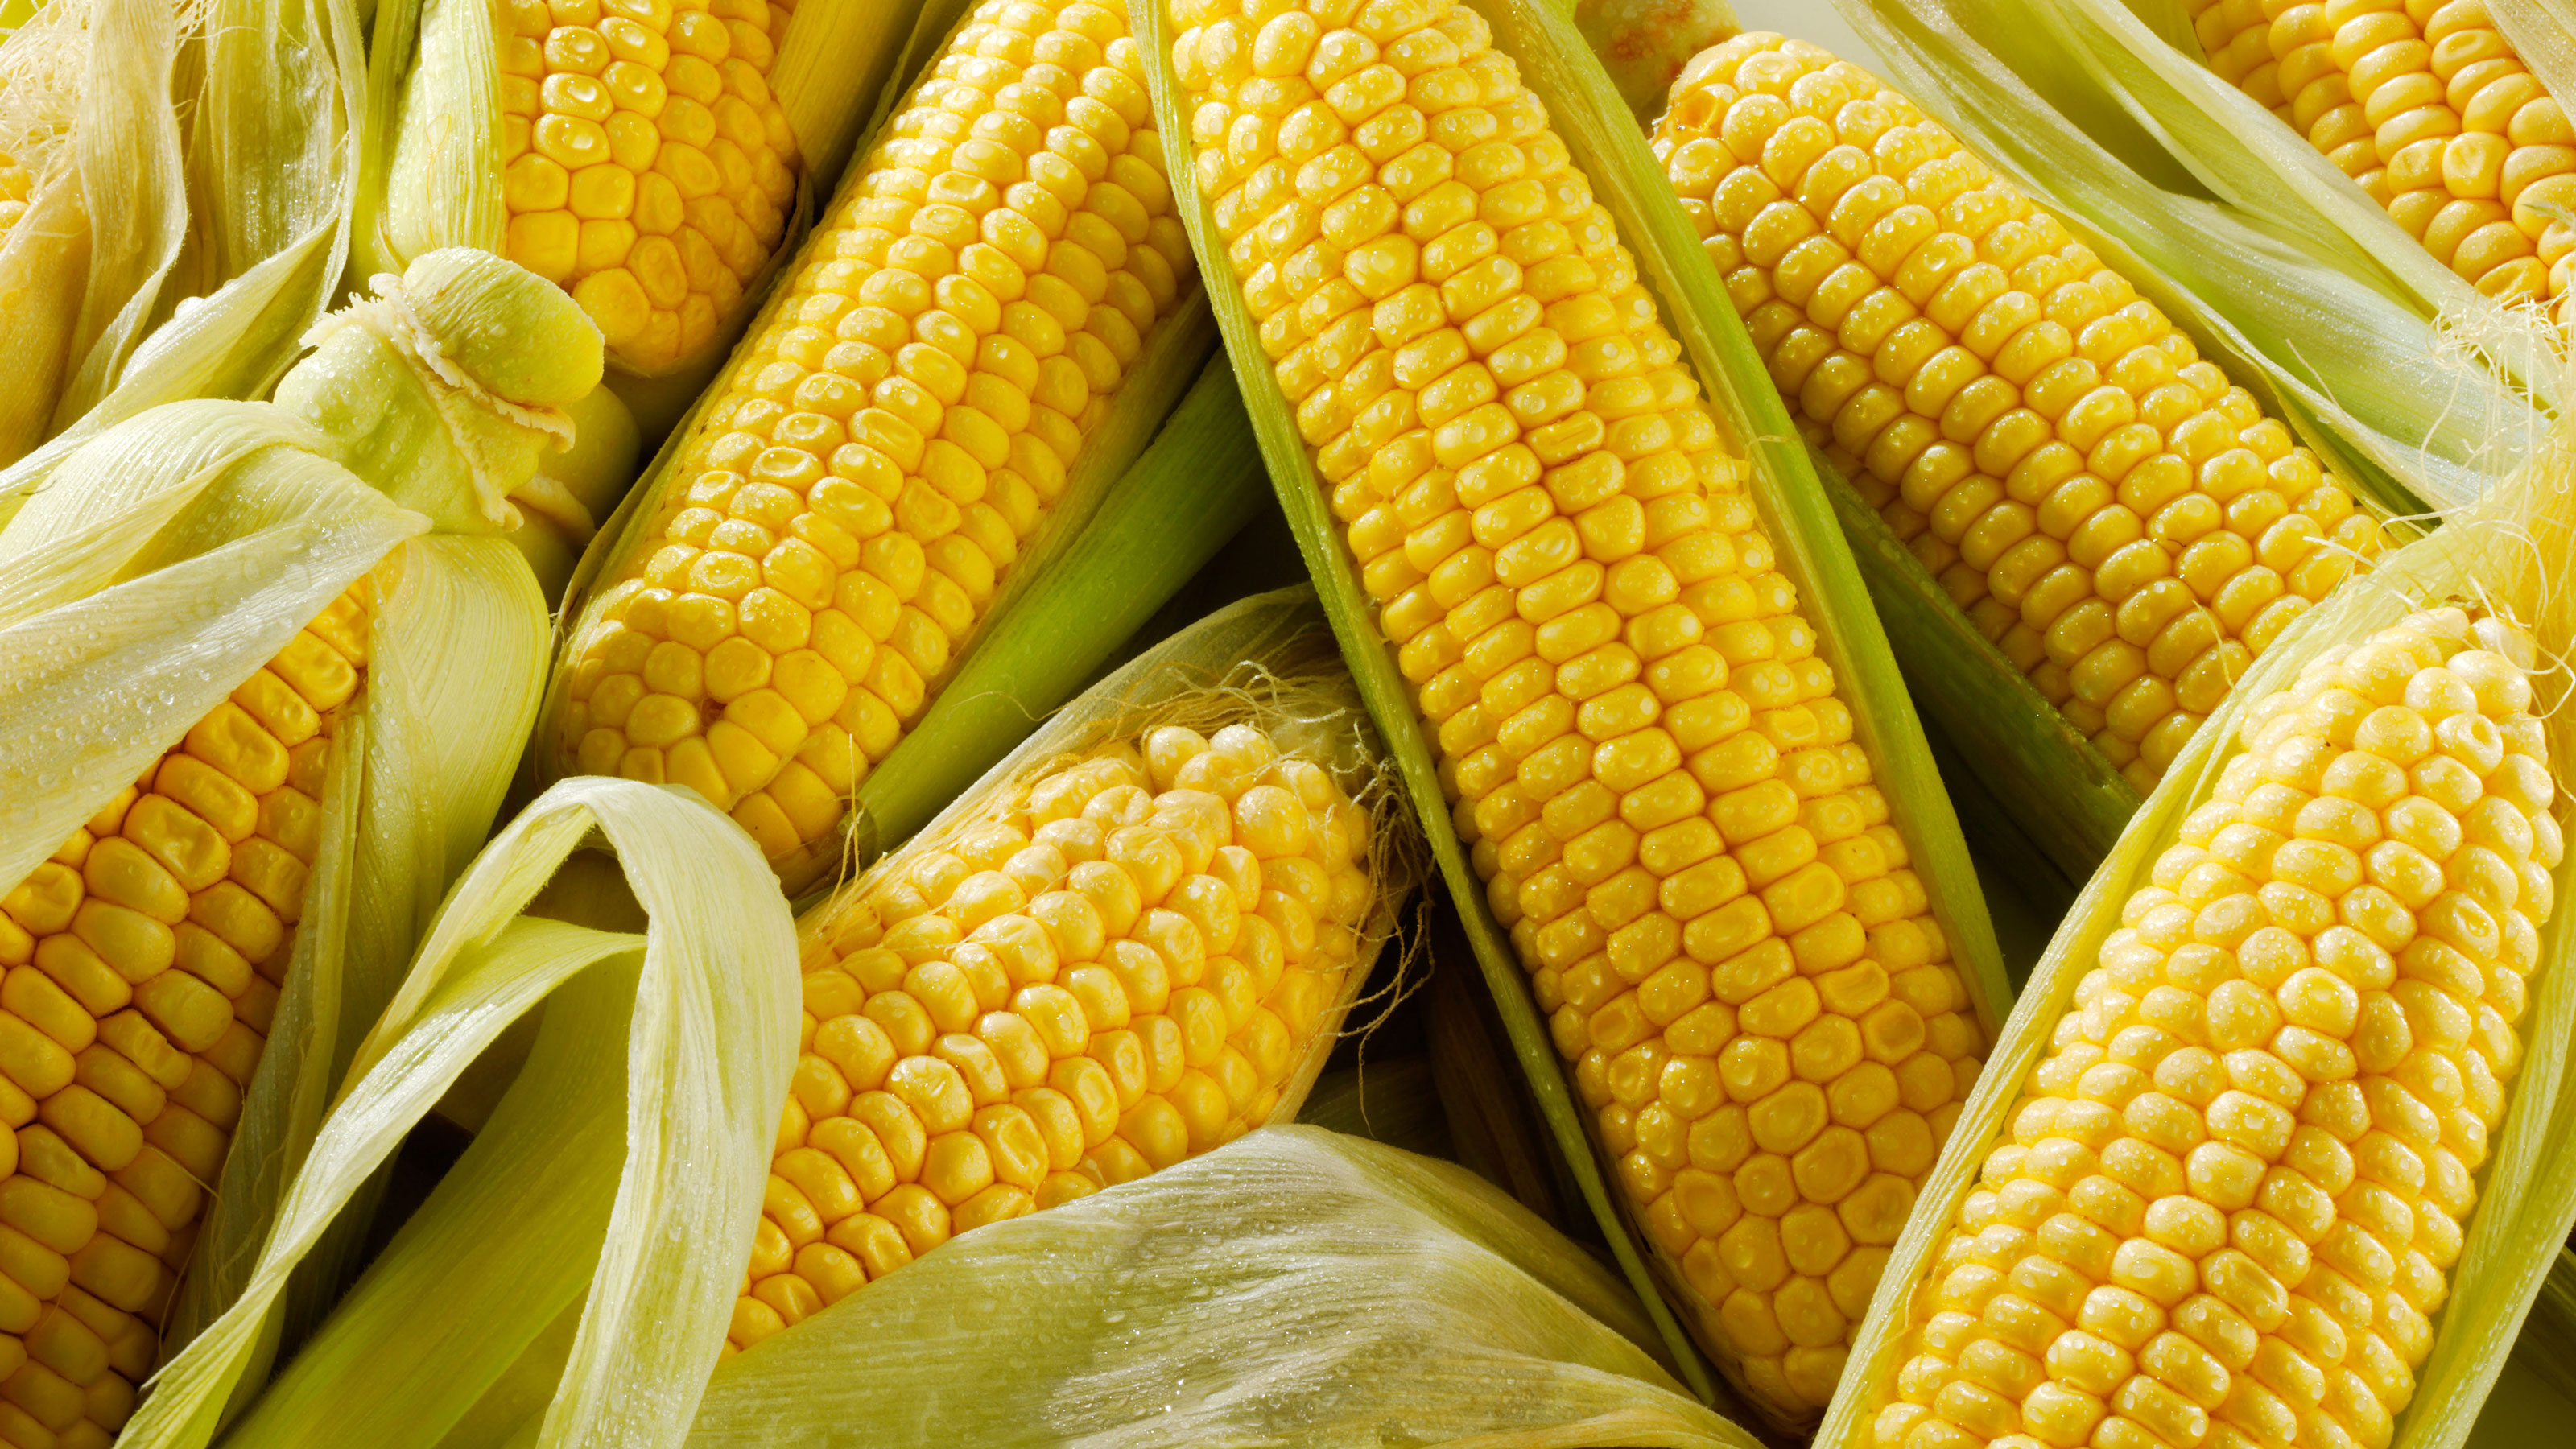 When are Sweetcorn ready to pick?